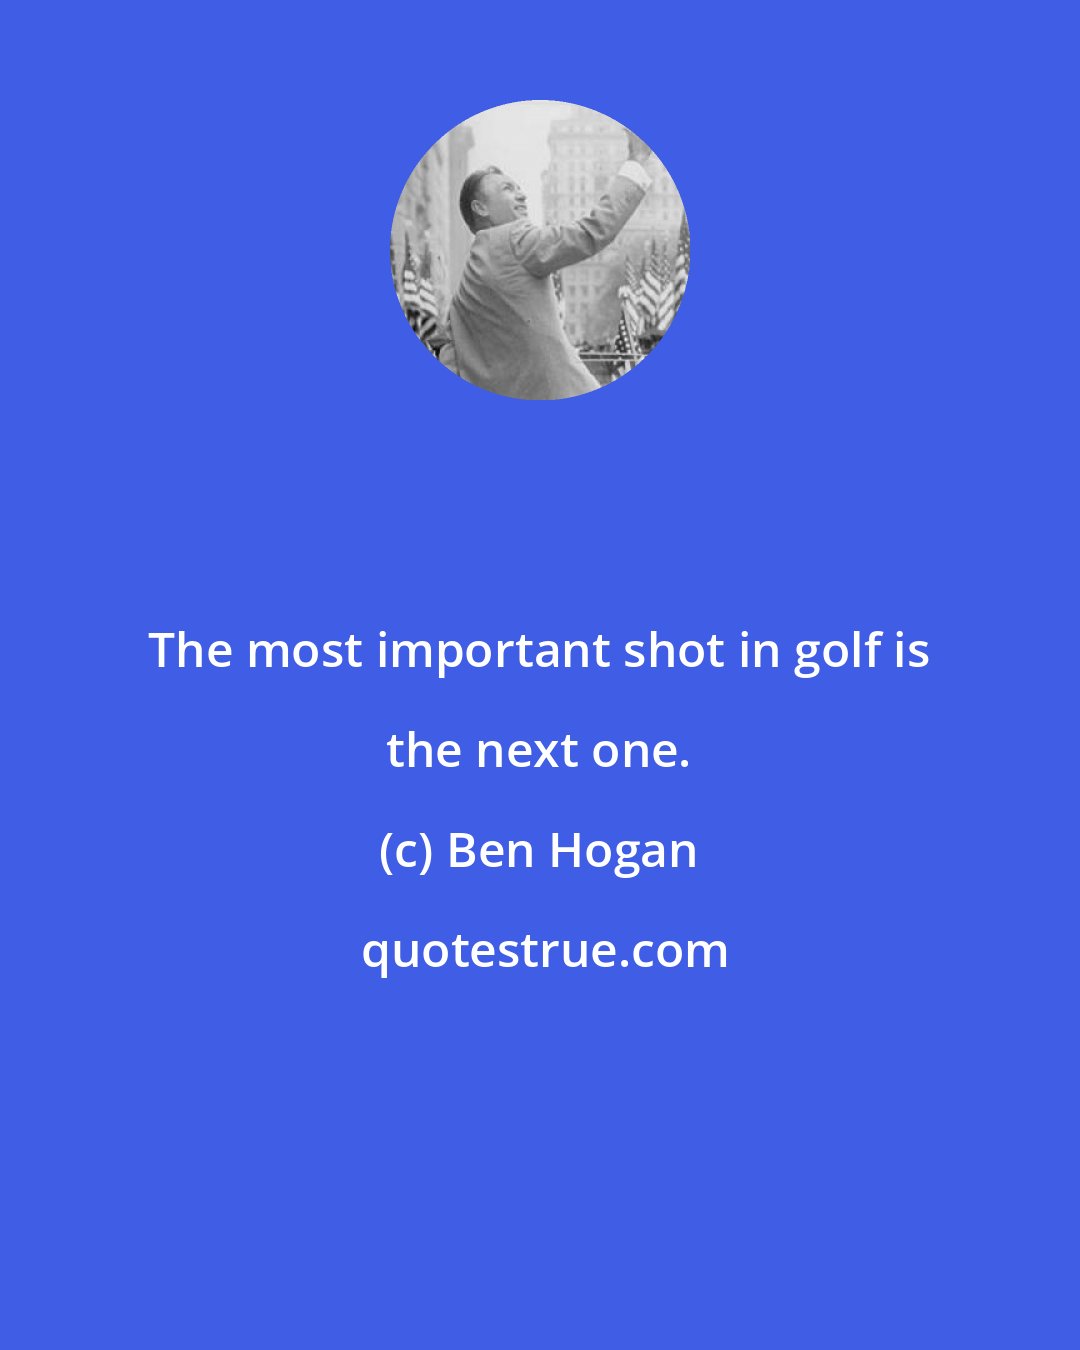 Ben Hogan: The most important shot in golf is the next one.